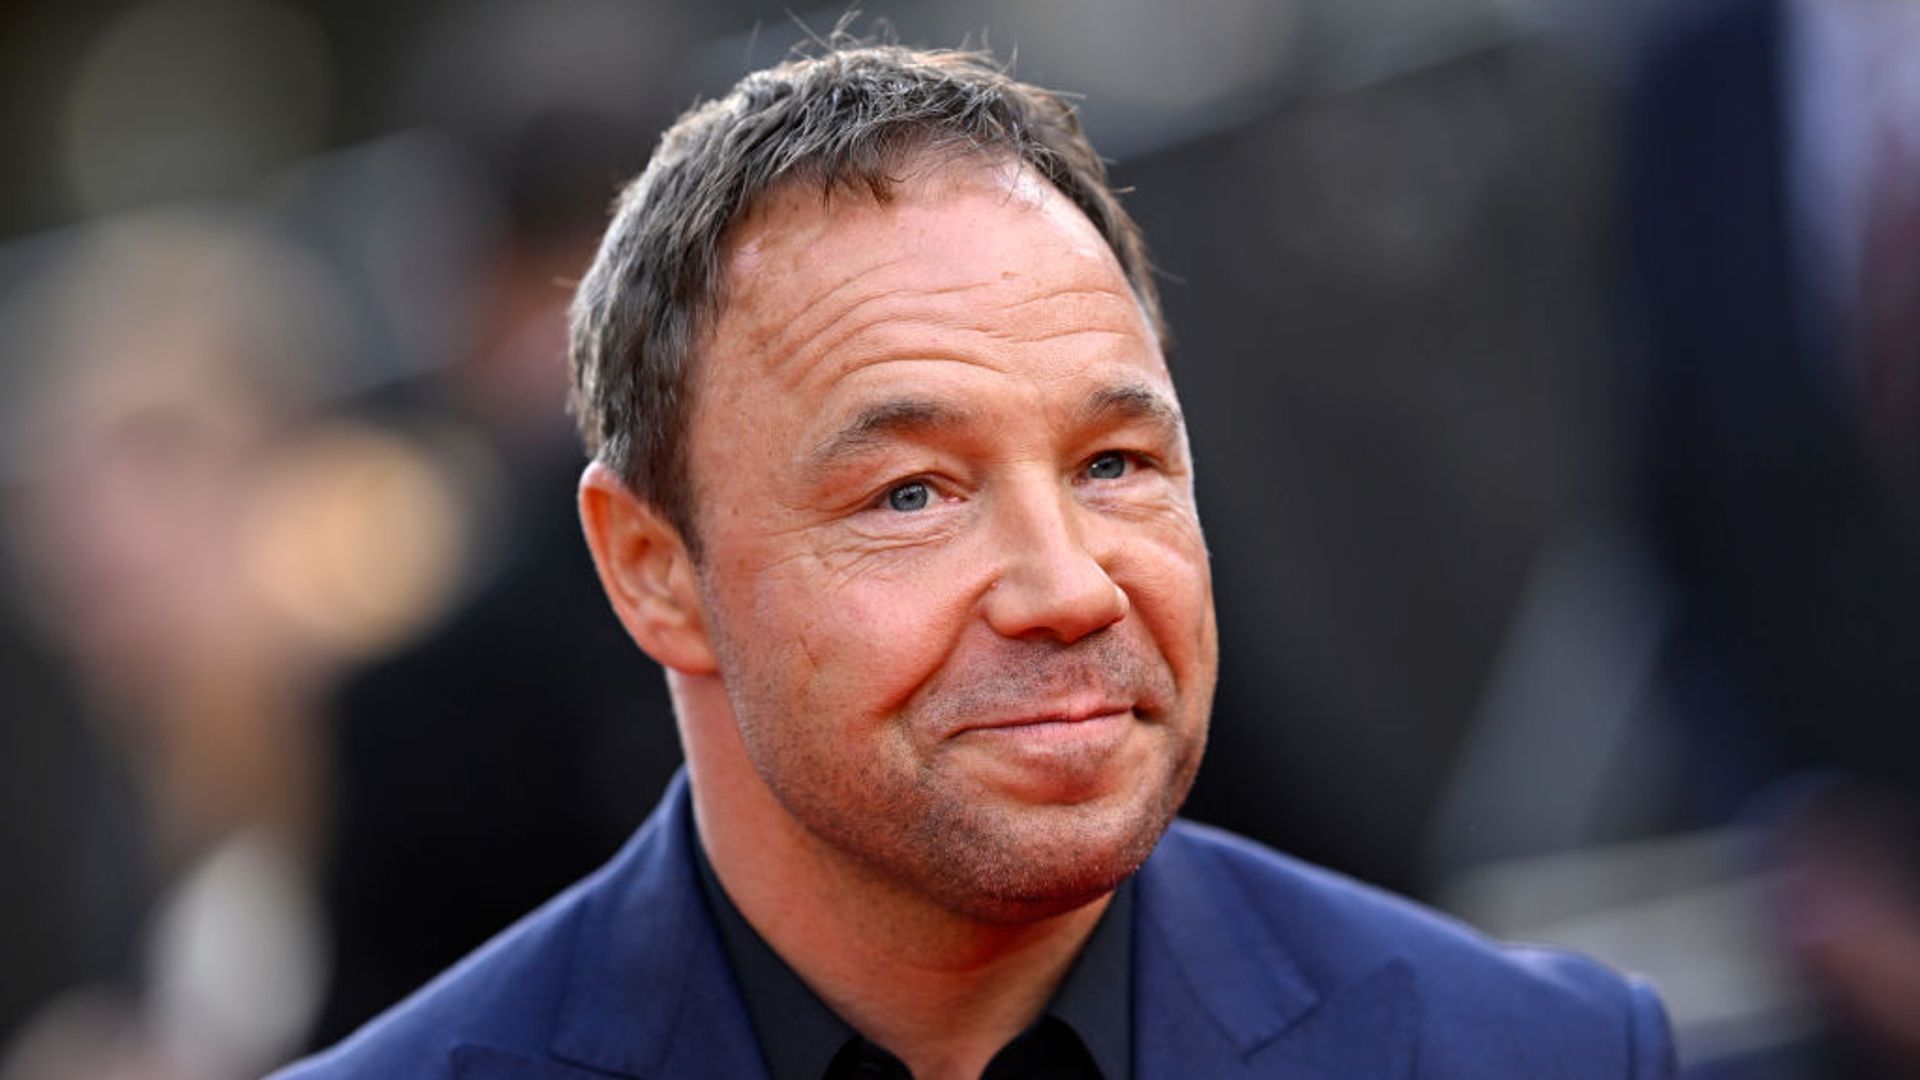 Stephen Graham attends the BFI London Film Festival Opening Night Gala and World Premiere of Roald Dahl's "Matilda The Musical"